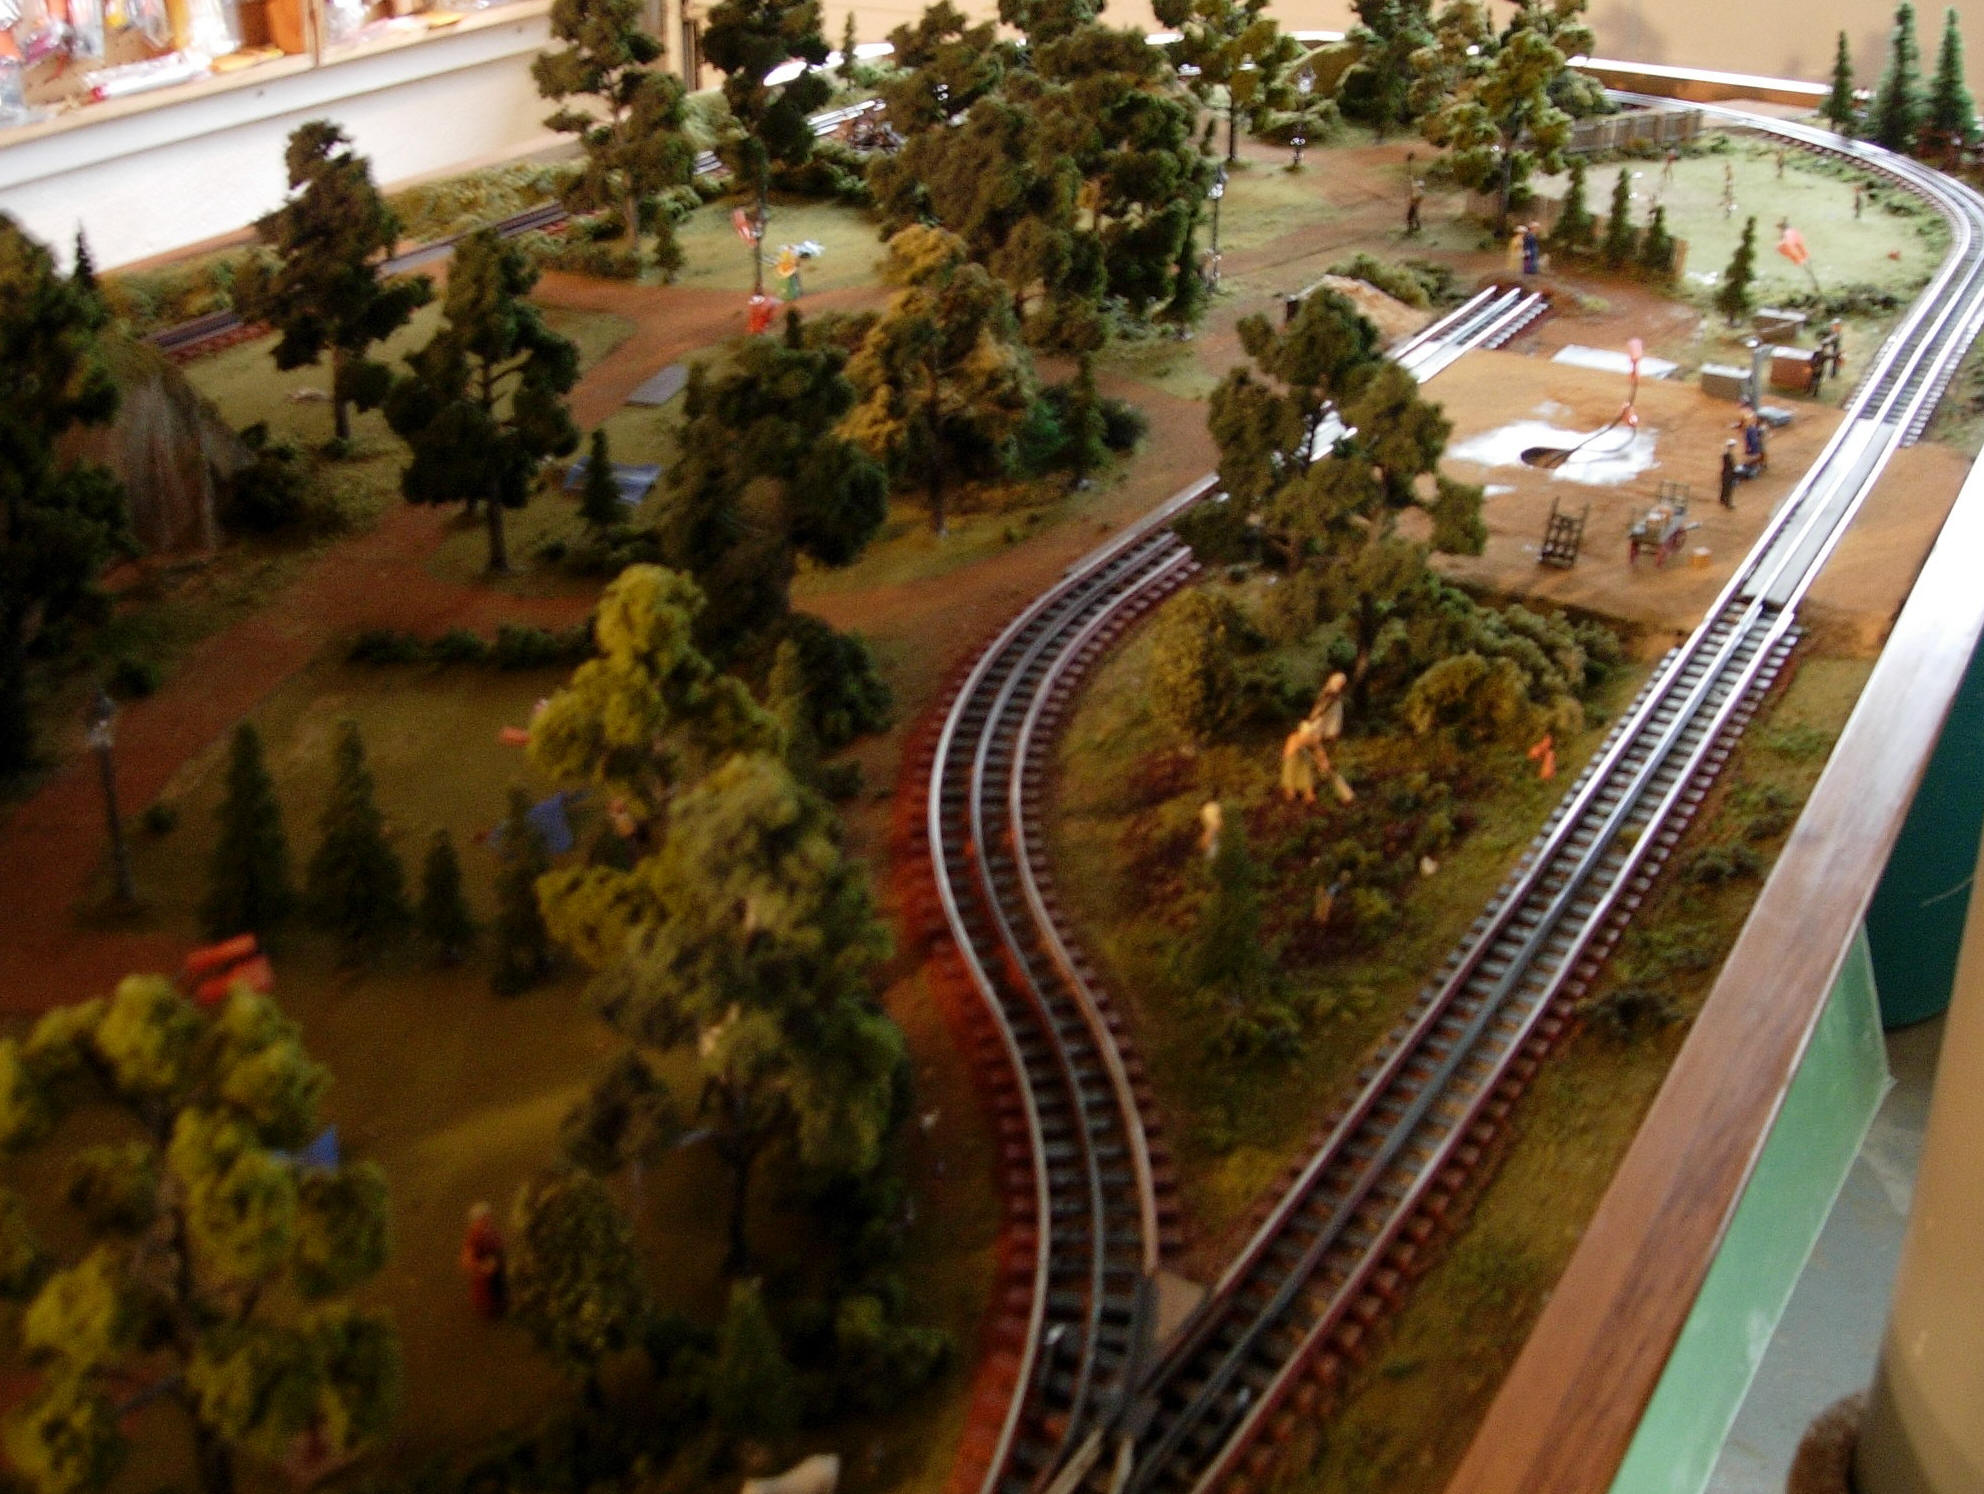 Train Layout Plans model railway back drops Let The Dog In